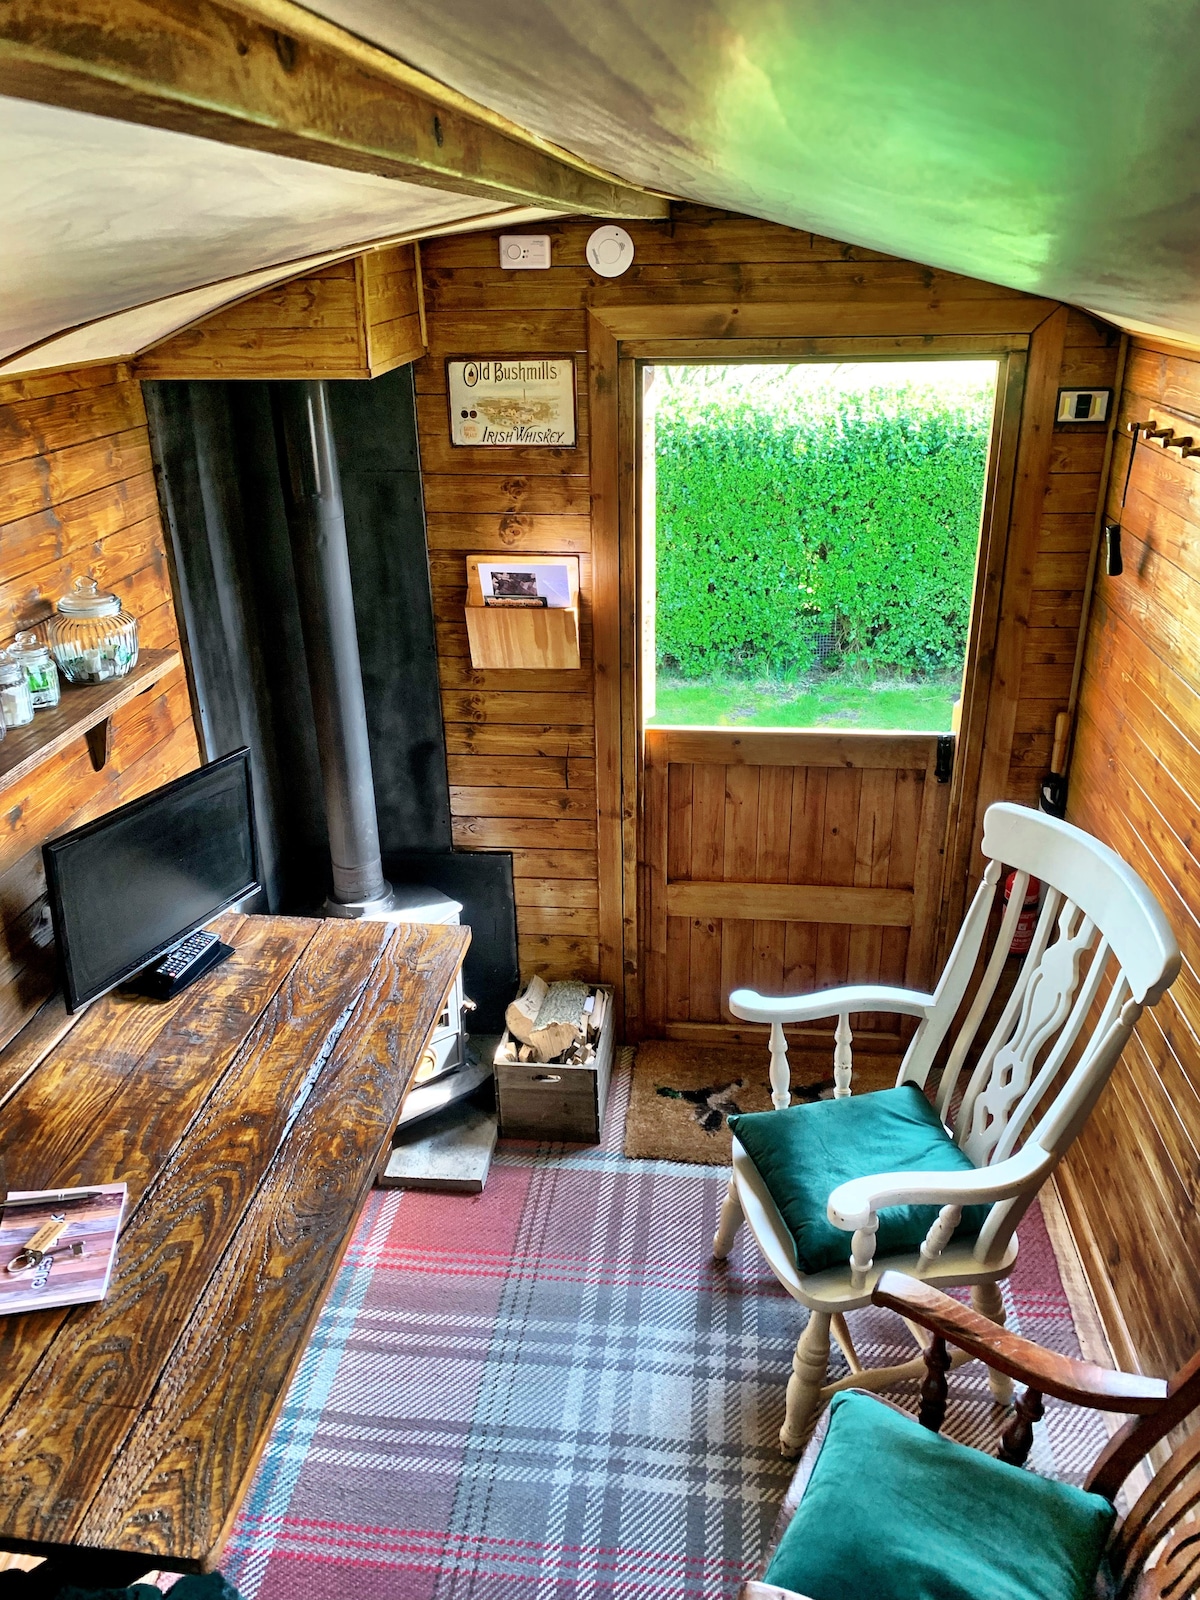 Cosy authentic Shepherds Hut, and all amenities.